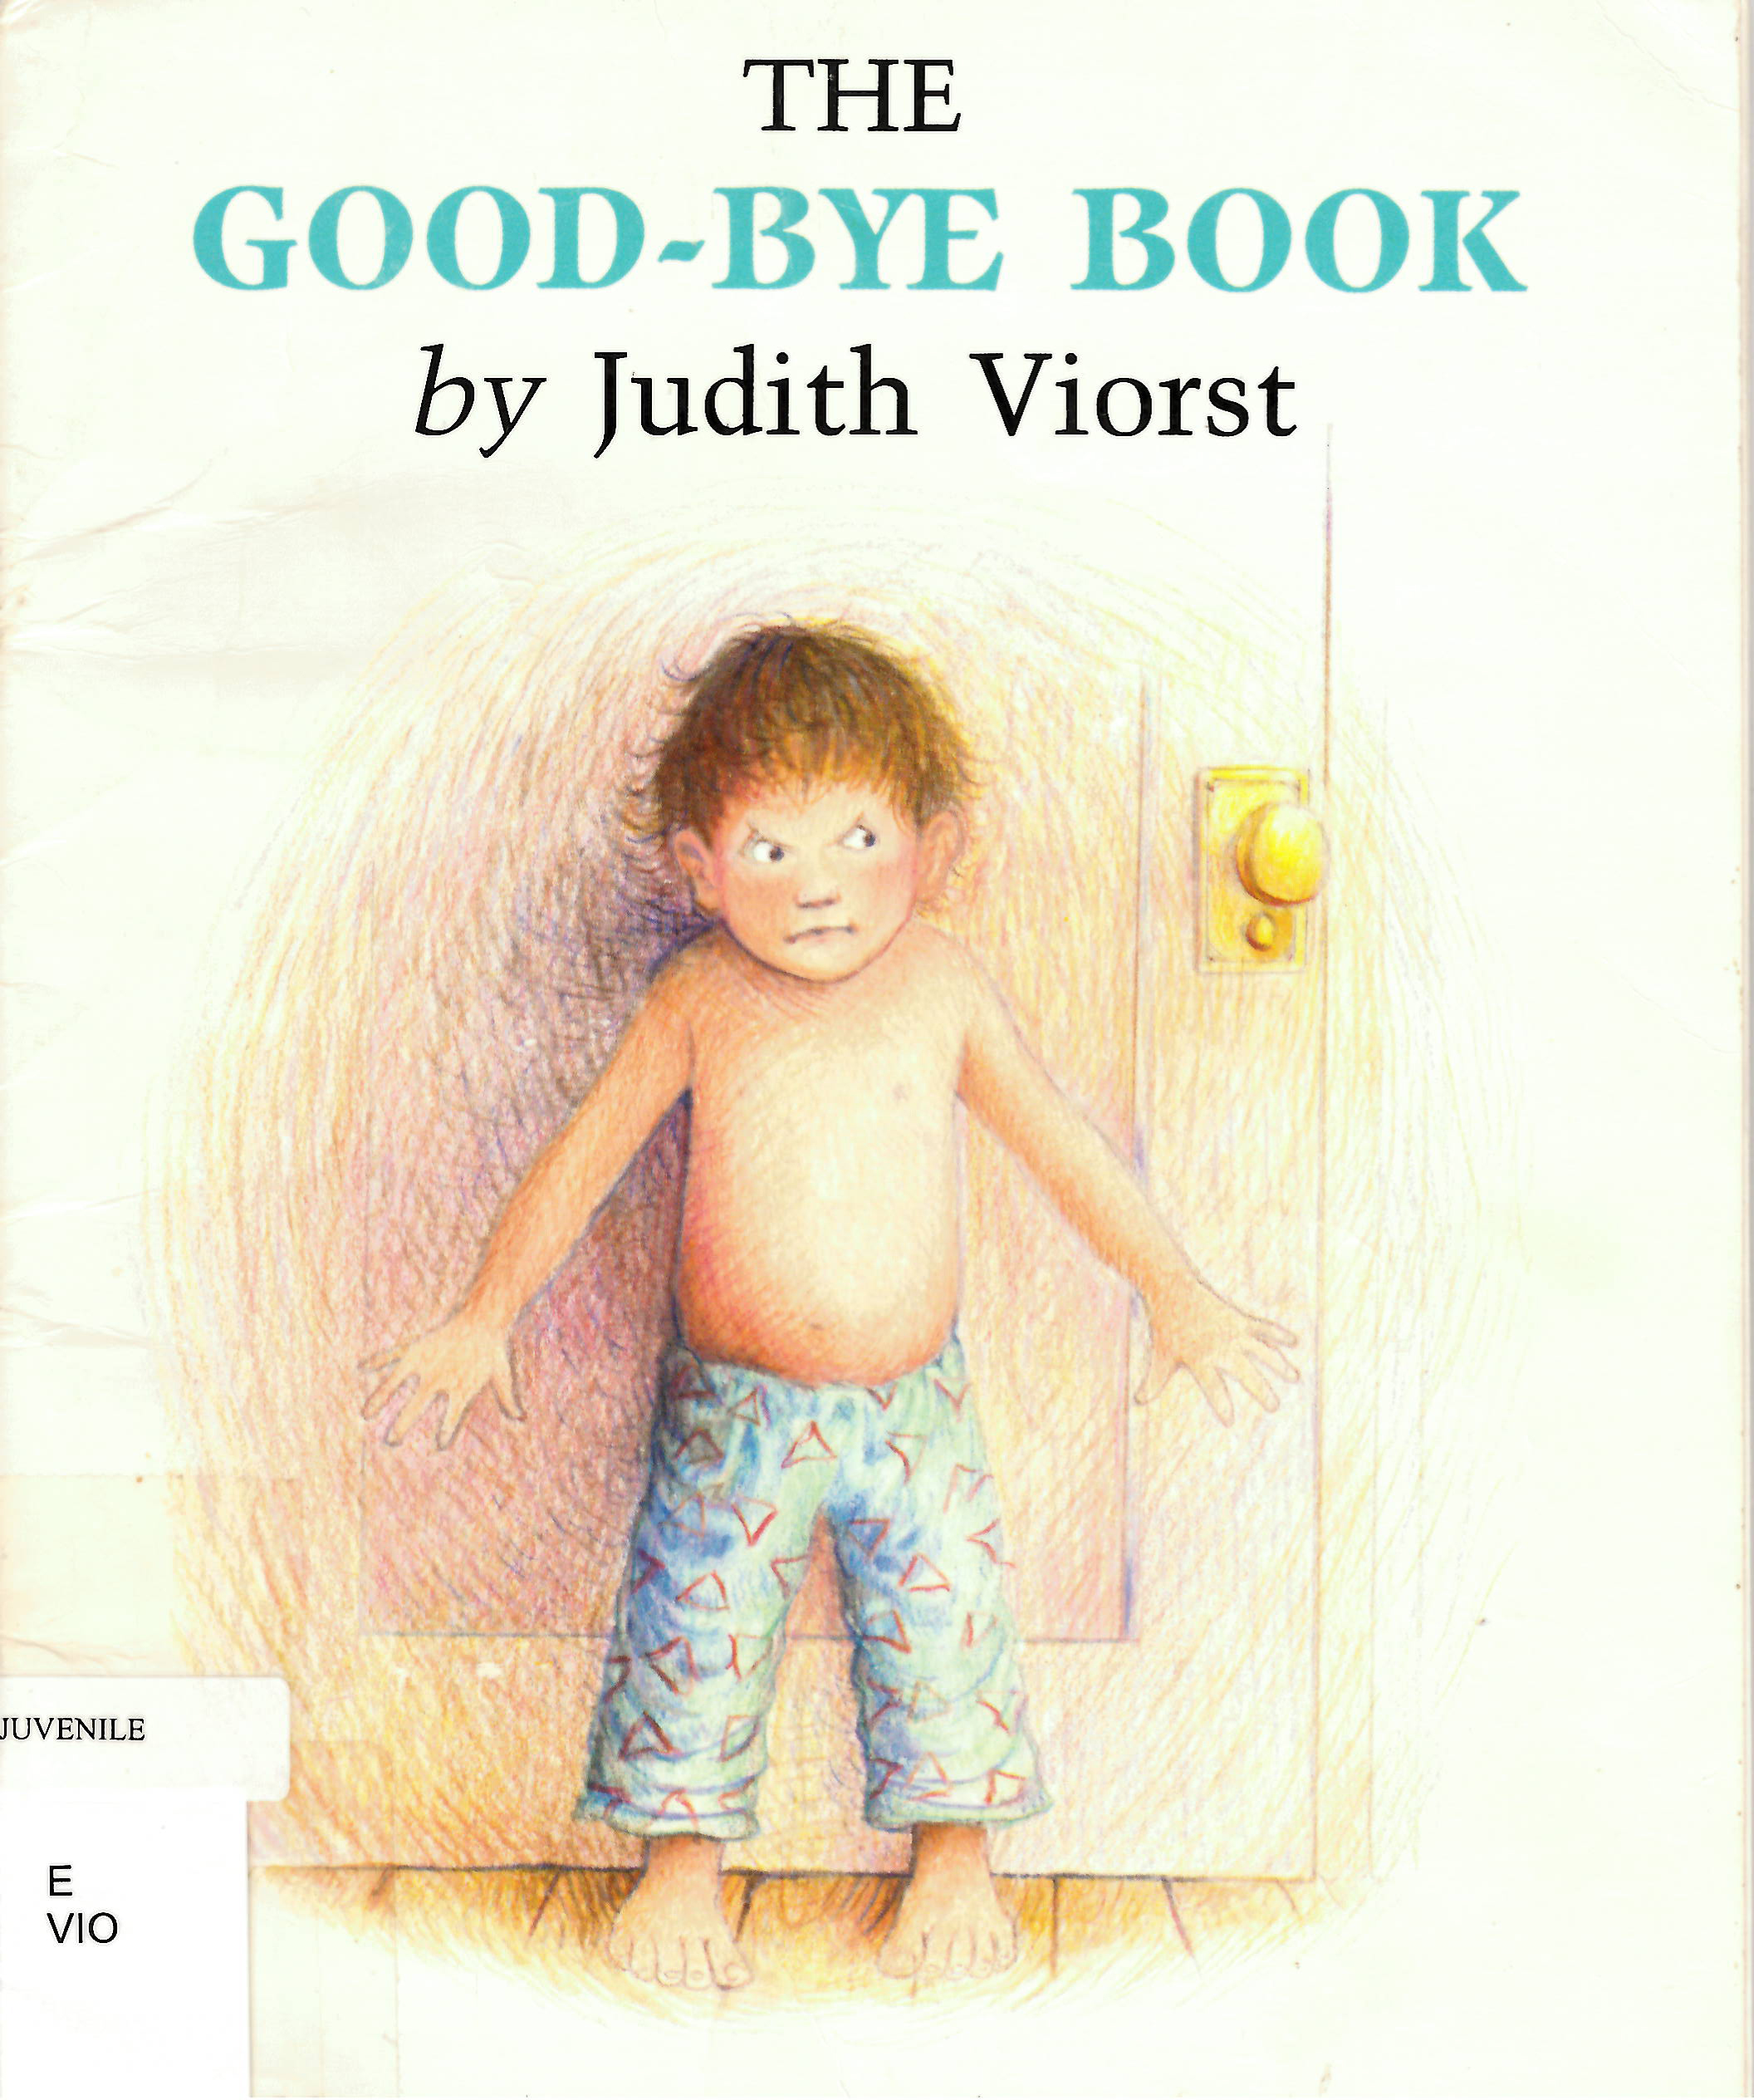 The good-bye book